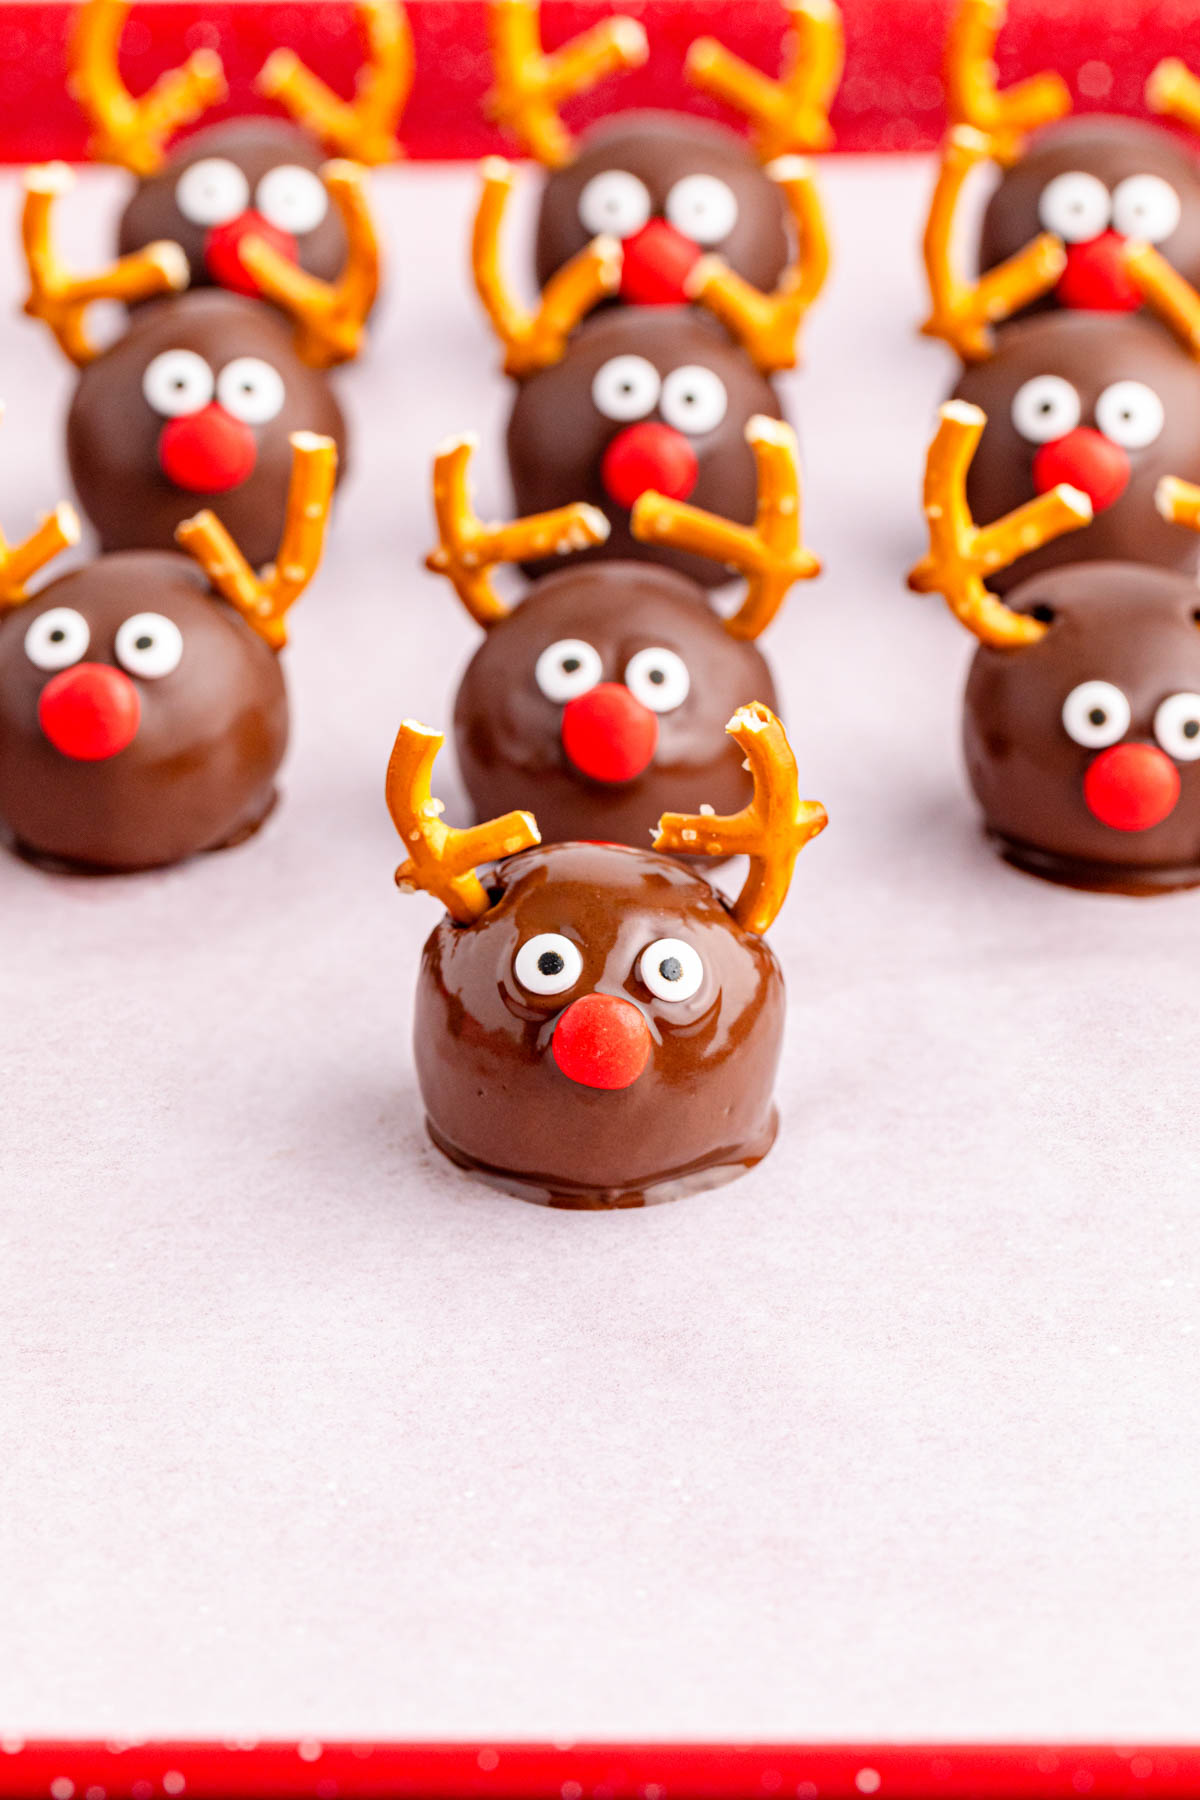 Chocolate reindeer balls on a red plate.